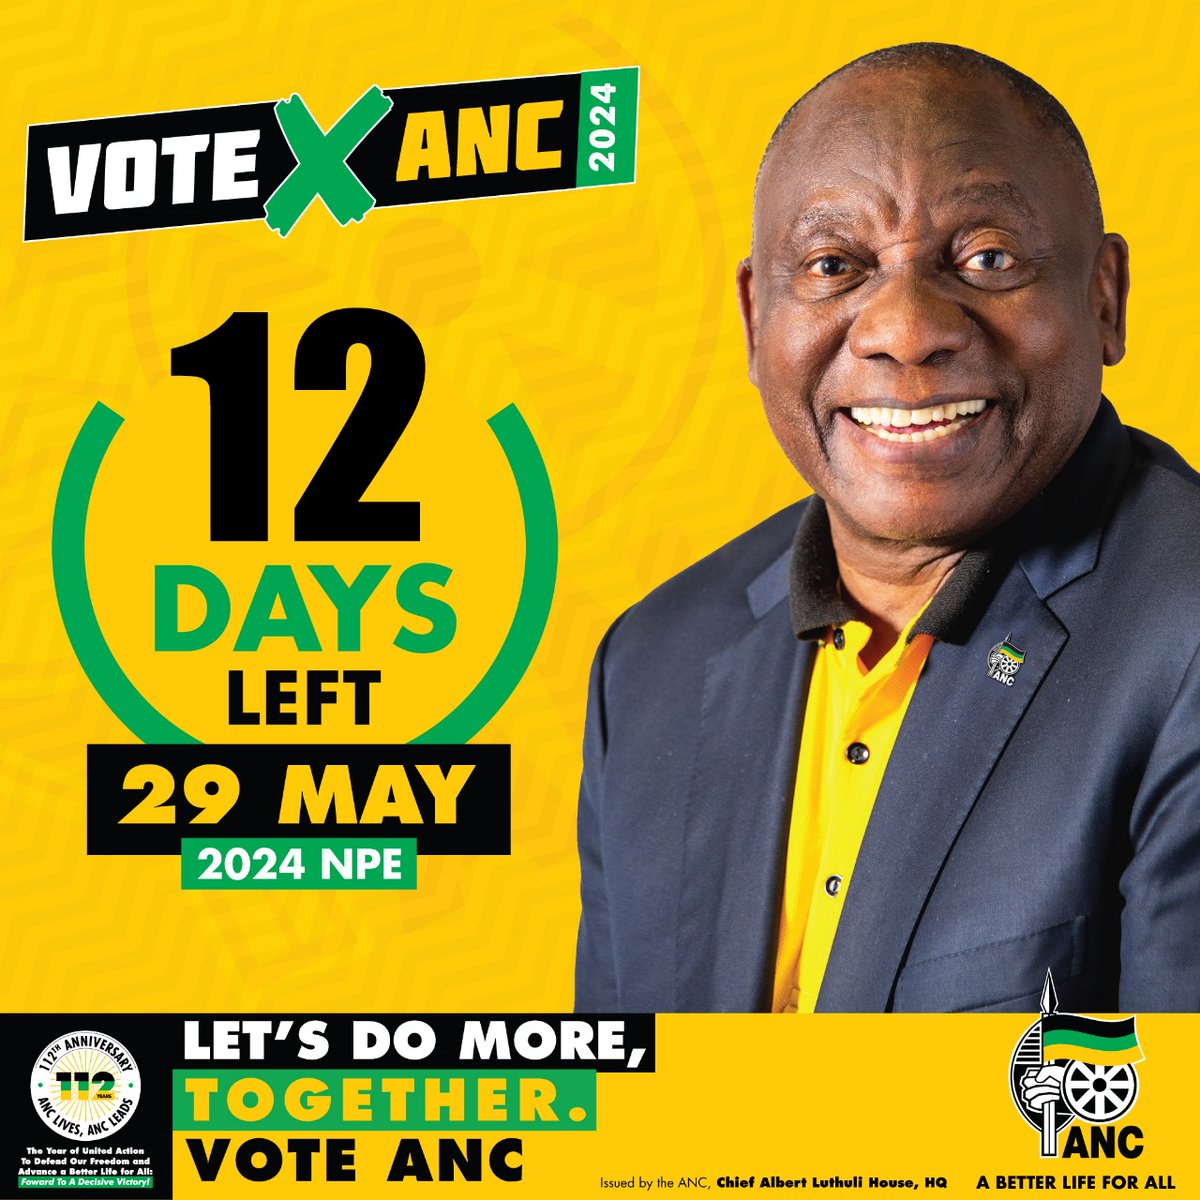 12 Days to go until the 2024 National and Provincial Elections, vote ANC on the 29th of May 2024!

1st Ballot: #VoteANC ❎
2nd Ballot: #VoteANC ❎
3rd Ballot: #VoteANC ❎

#VoteANC2024
#LetsDoMoreTogether ⚫️🟢🟡